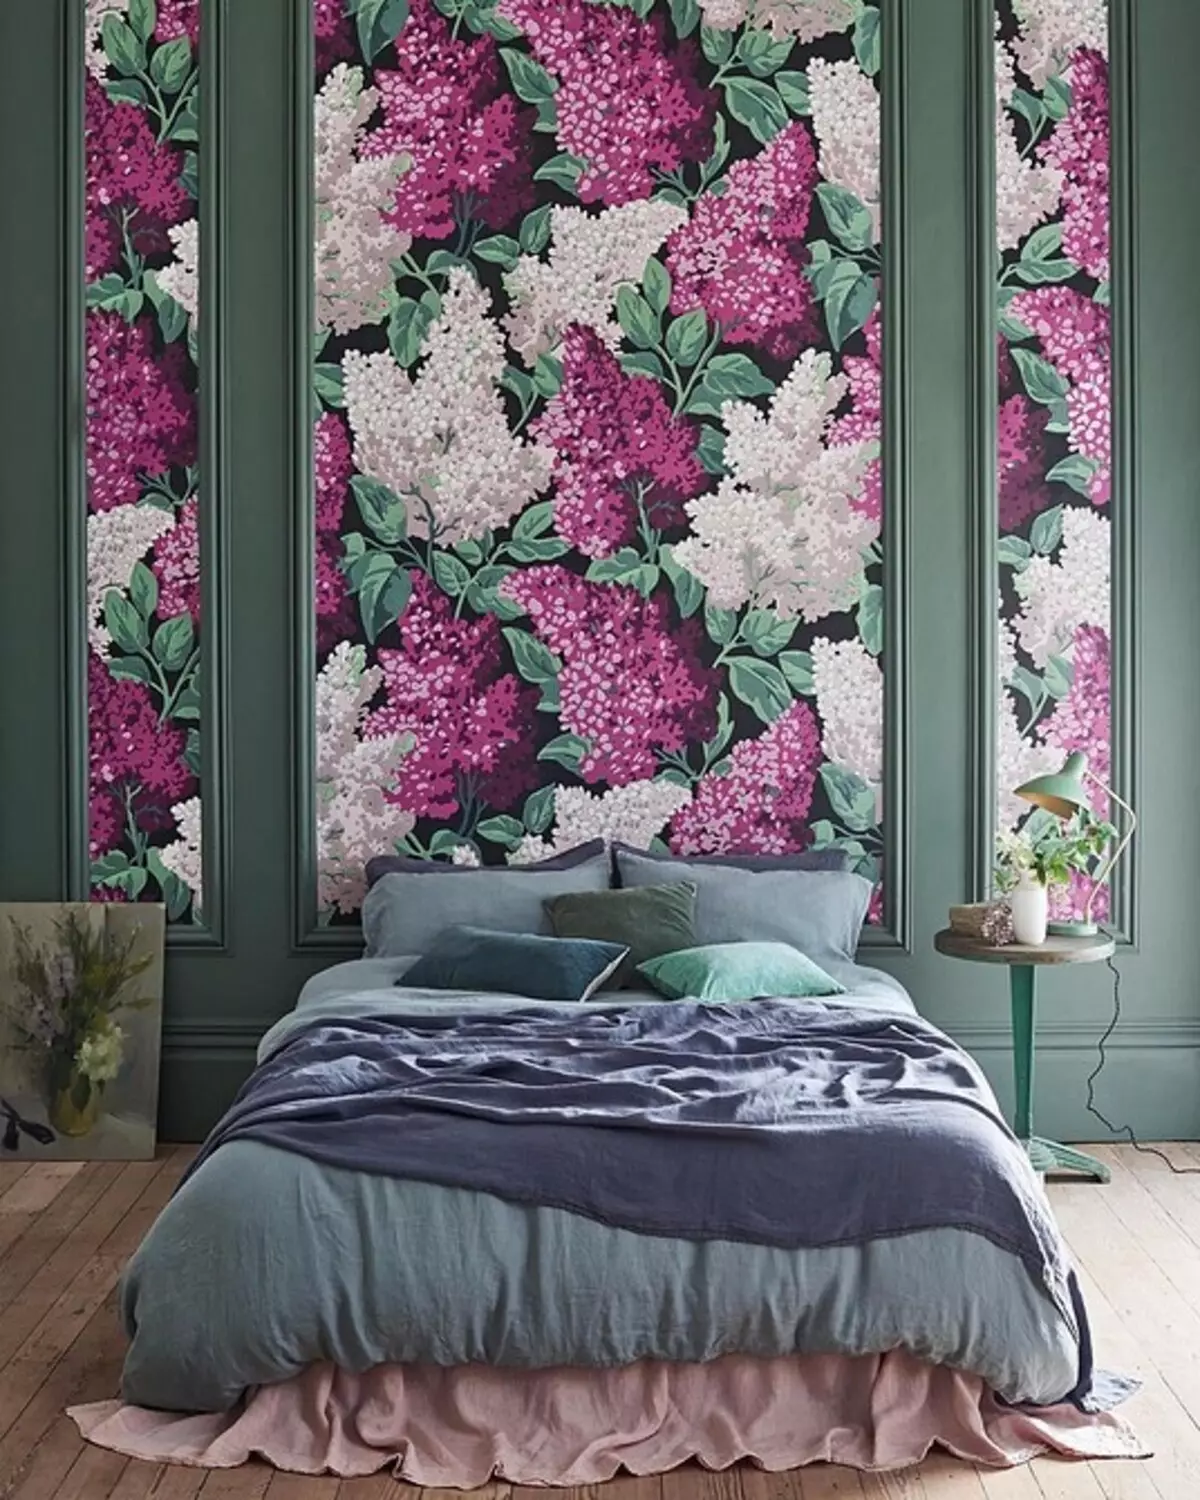 Bedroom Wallpaper Design: Fashion Trends 2020 and Selling Tips 6477_18